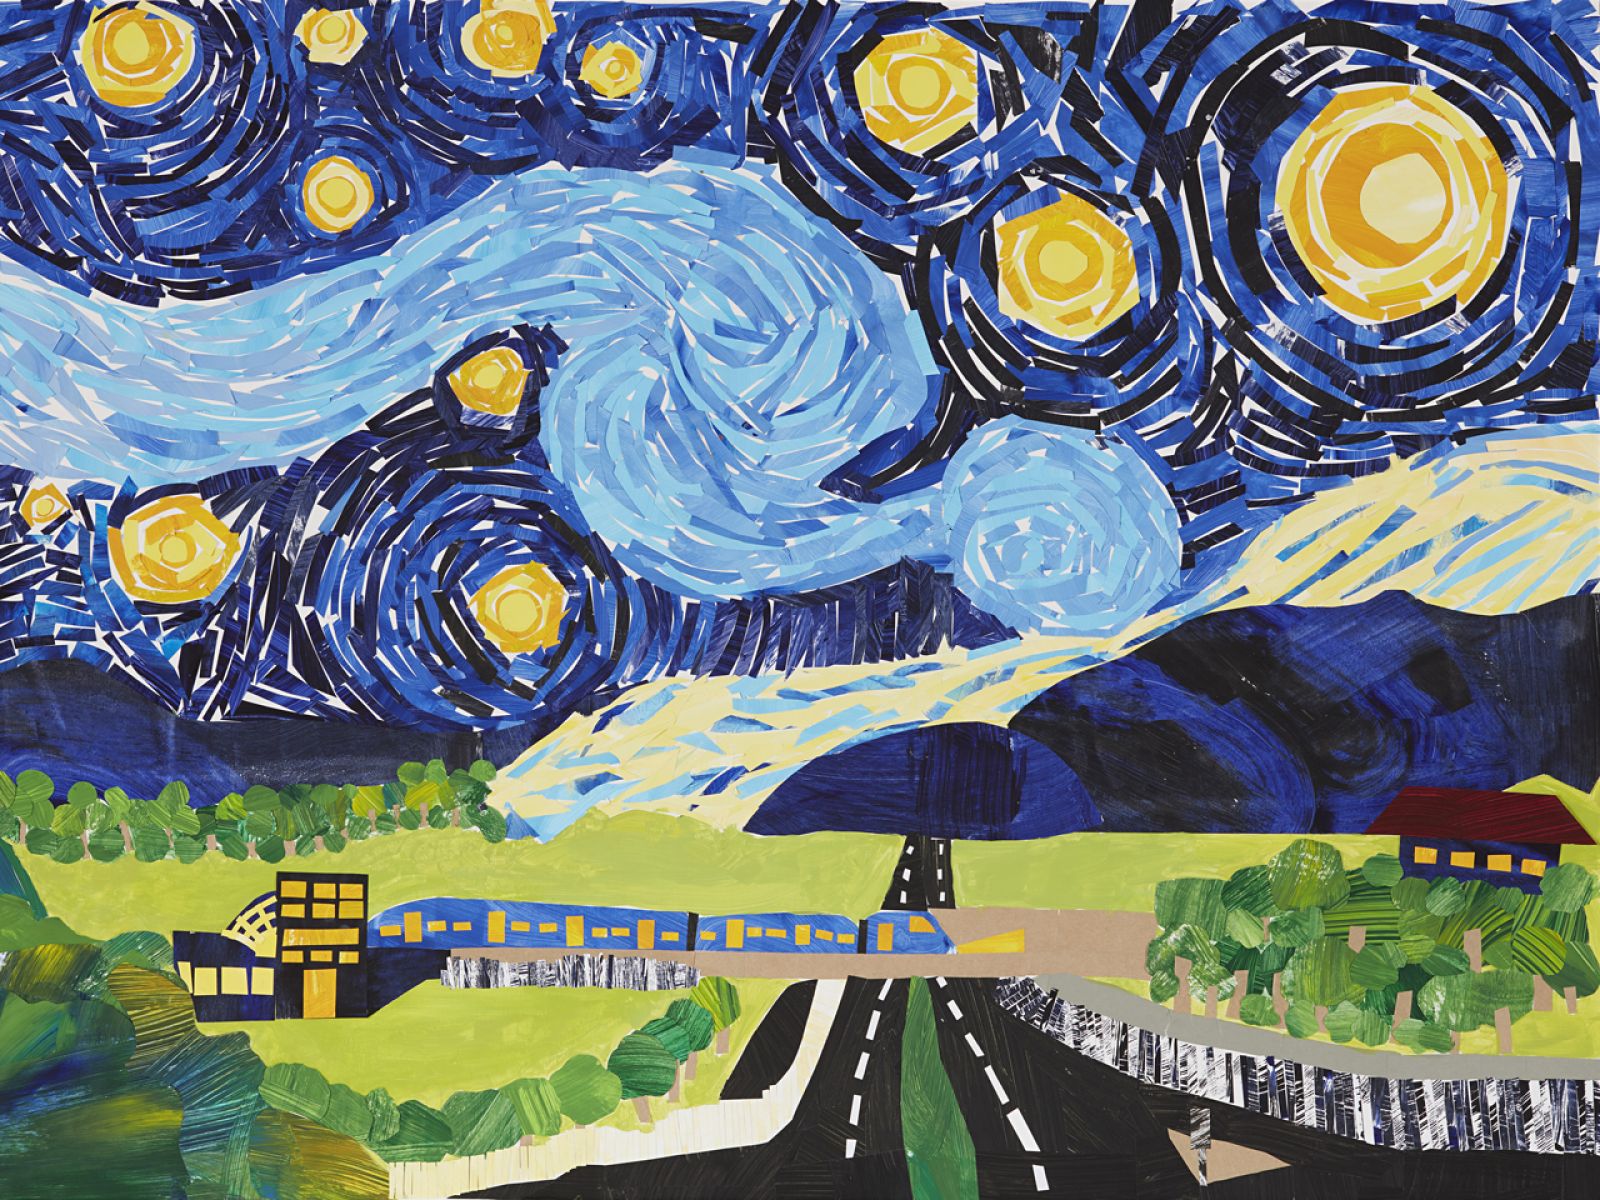 Artwork that takes inspiration from Van Gogh's Starry Night with a train.